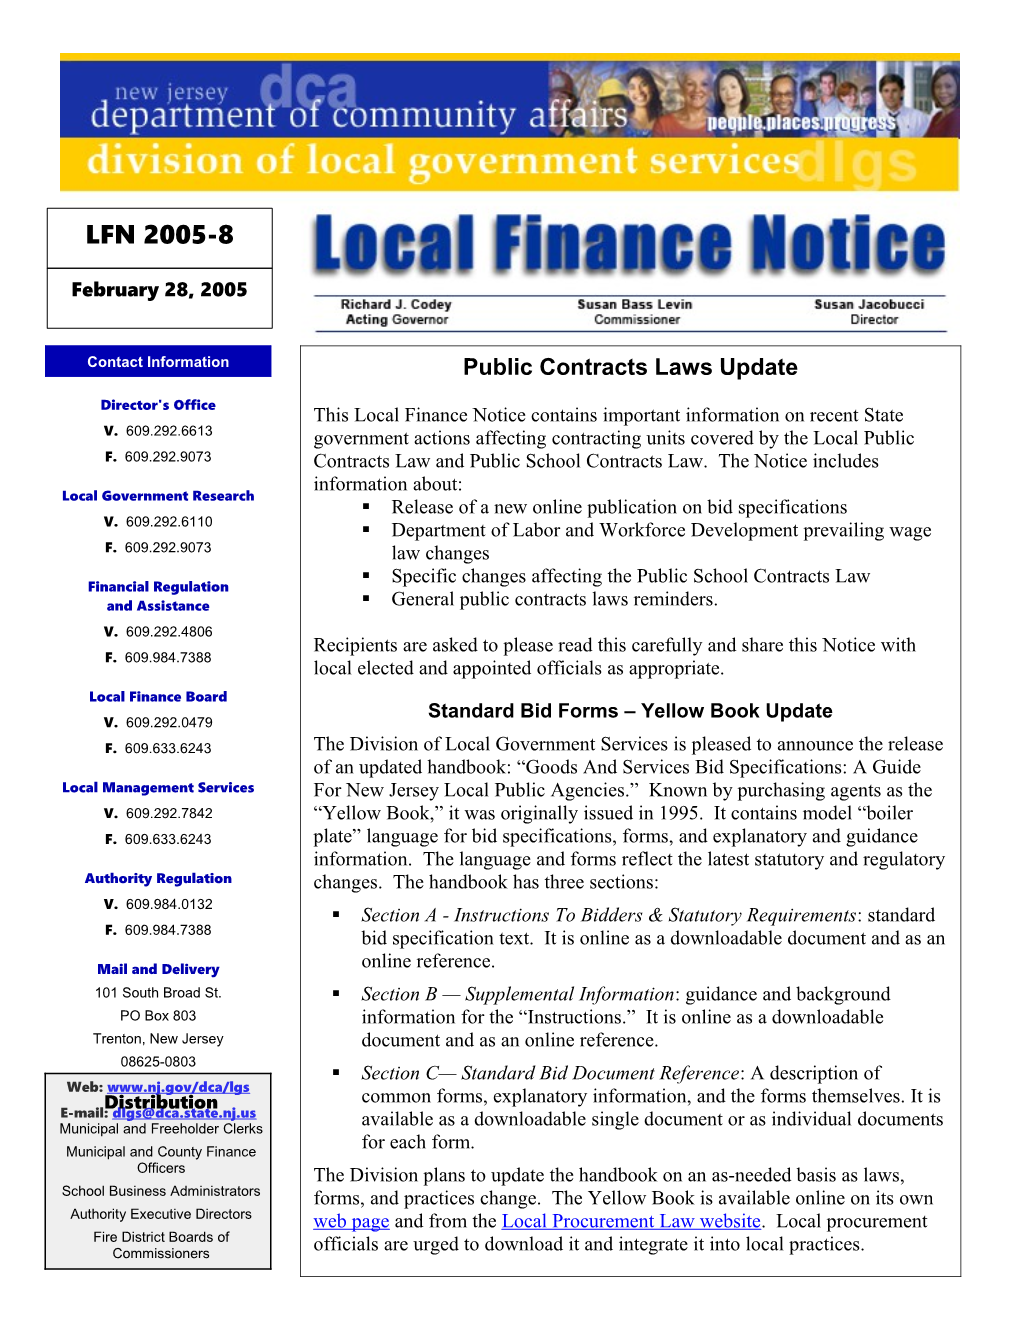 Local Finance Notice 2005-8February 28, 2005Page 1